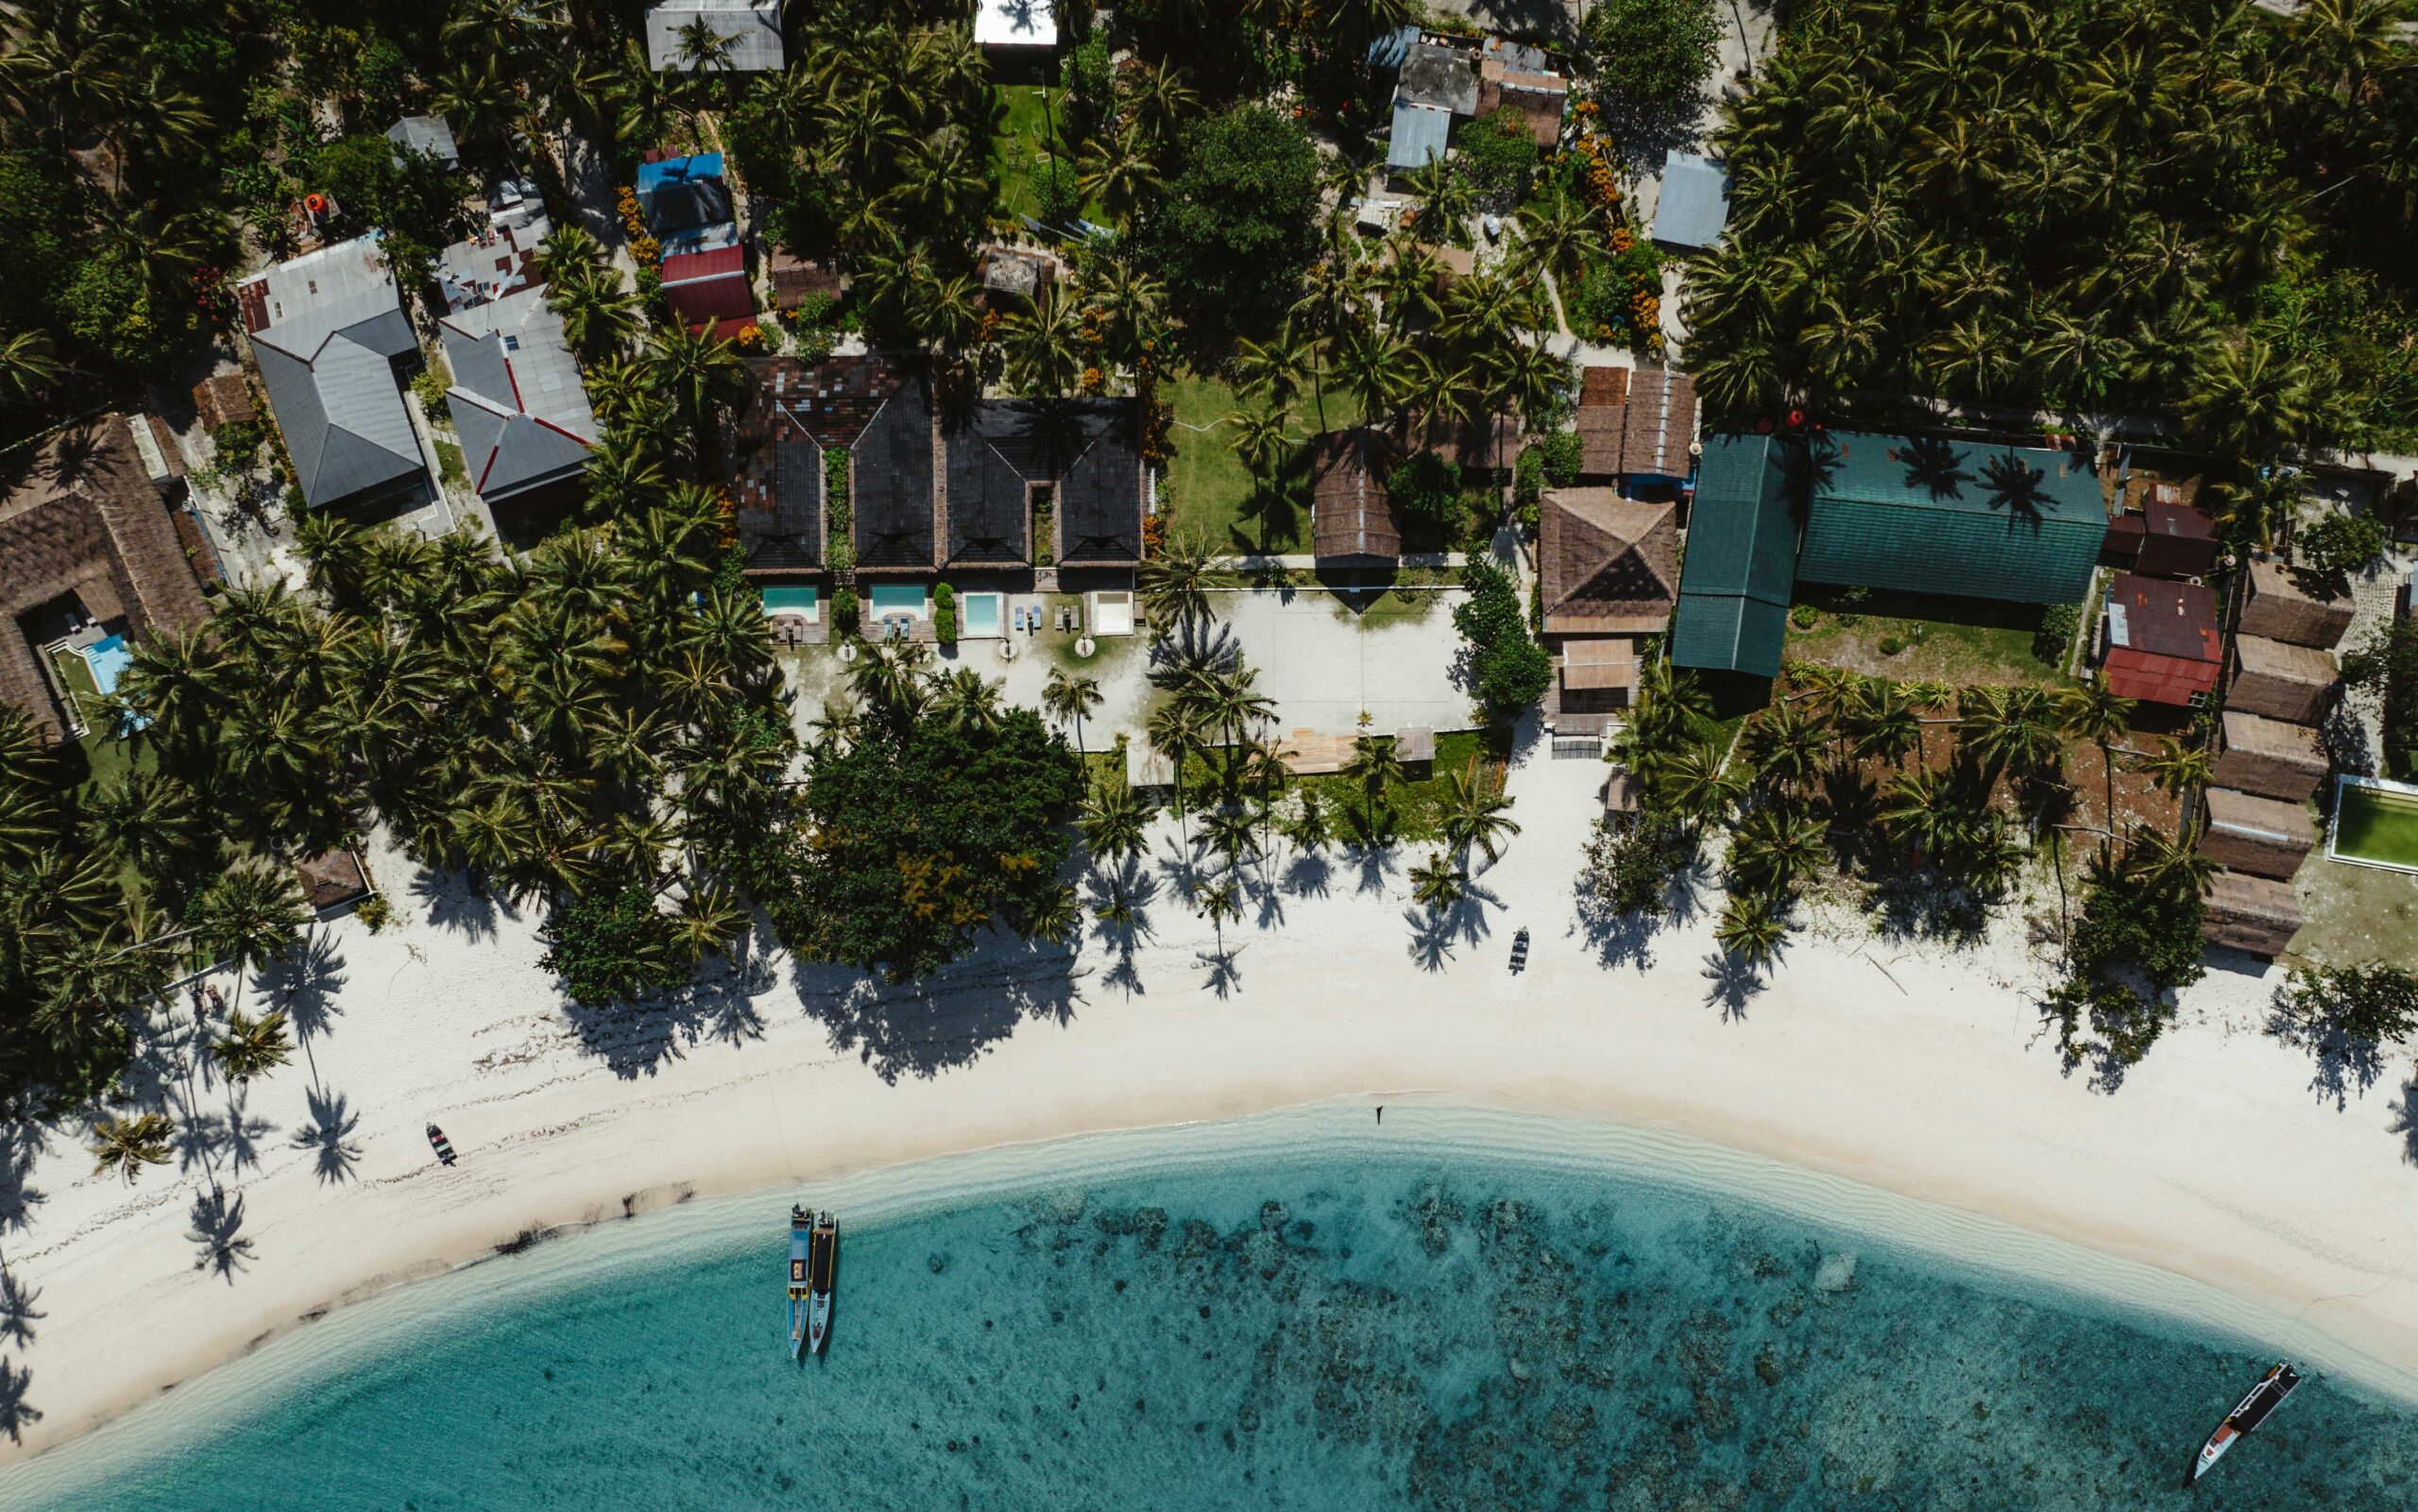 Stunning overhead drone photo of the Hollow Tree's Surf Resort in the Mentawai Islands